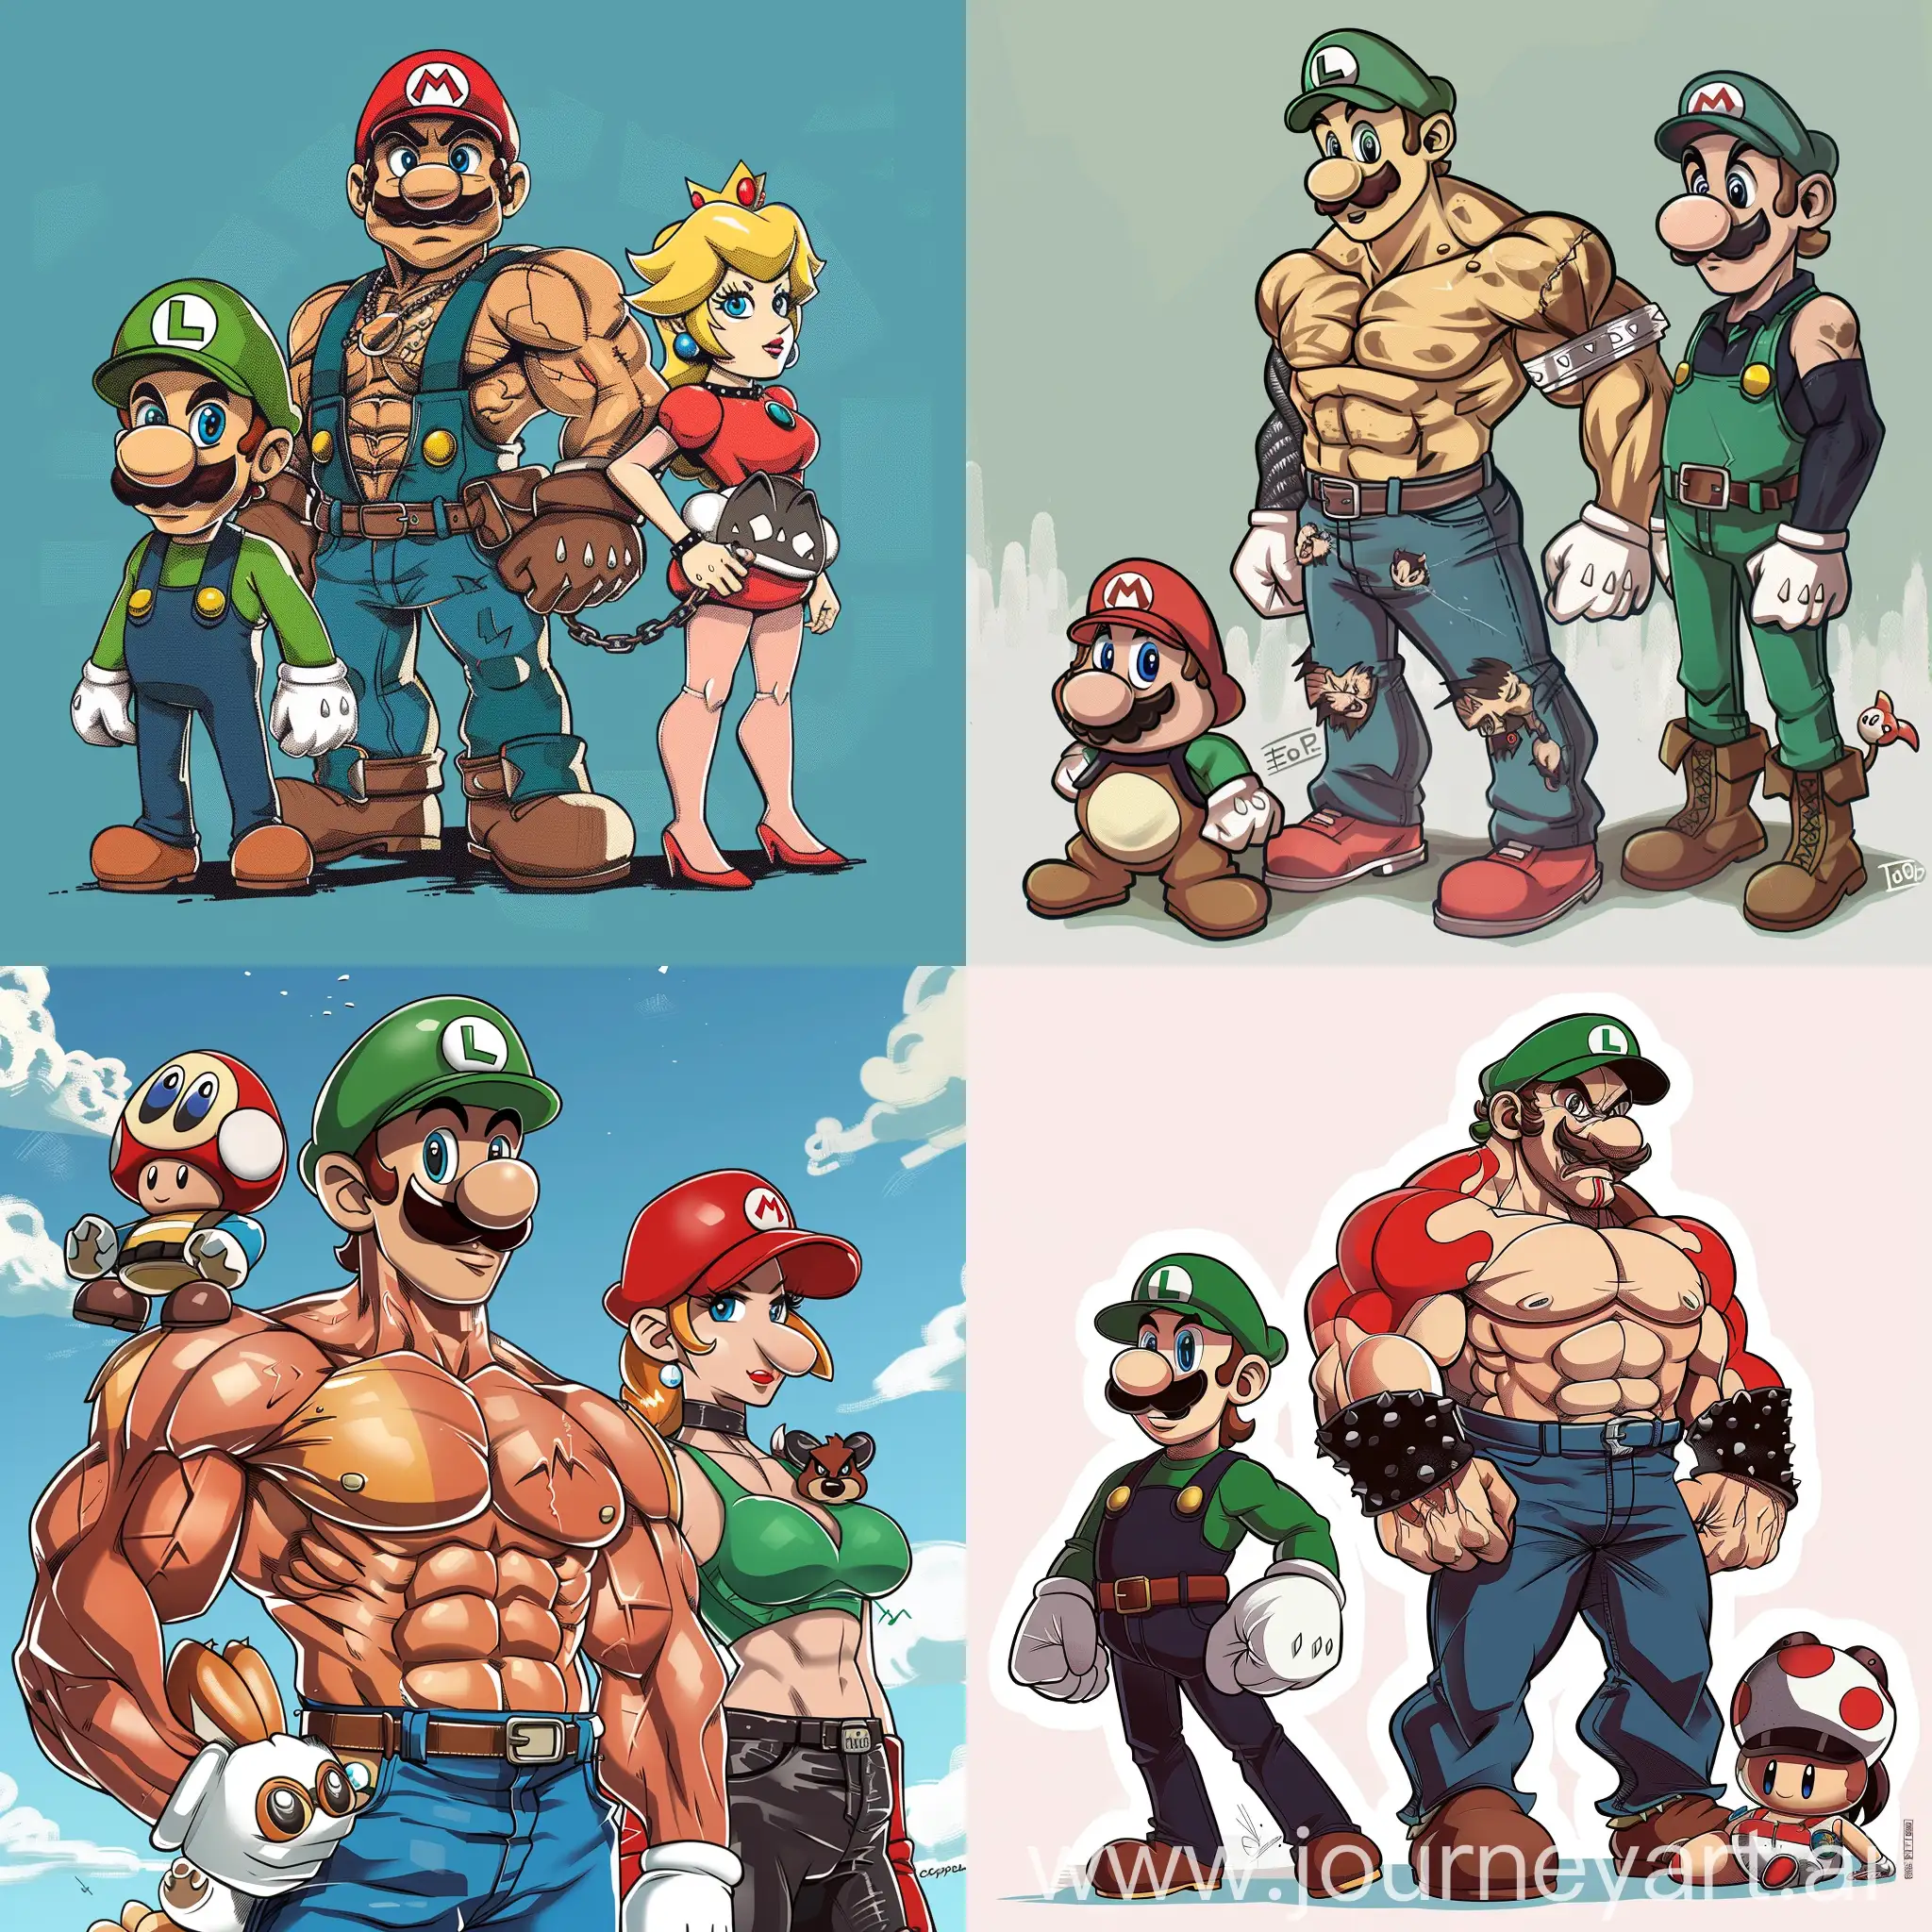 Nintendo-Characters-in-Leather-and-Muscle-Attire-Mario-as-a-Muscle-Daddy-Luigi-as-a-Muscle-Pup-Peach-as-a-Leather-Man-and-Toad-as-an-Omega-Pup